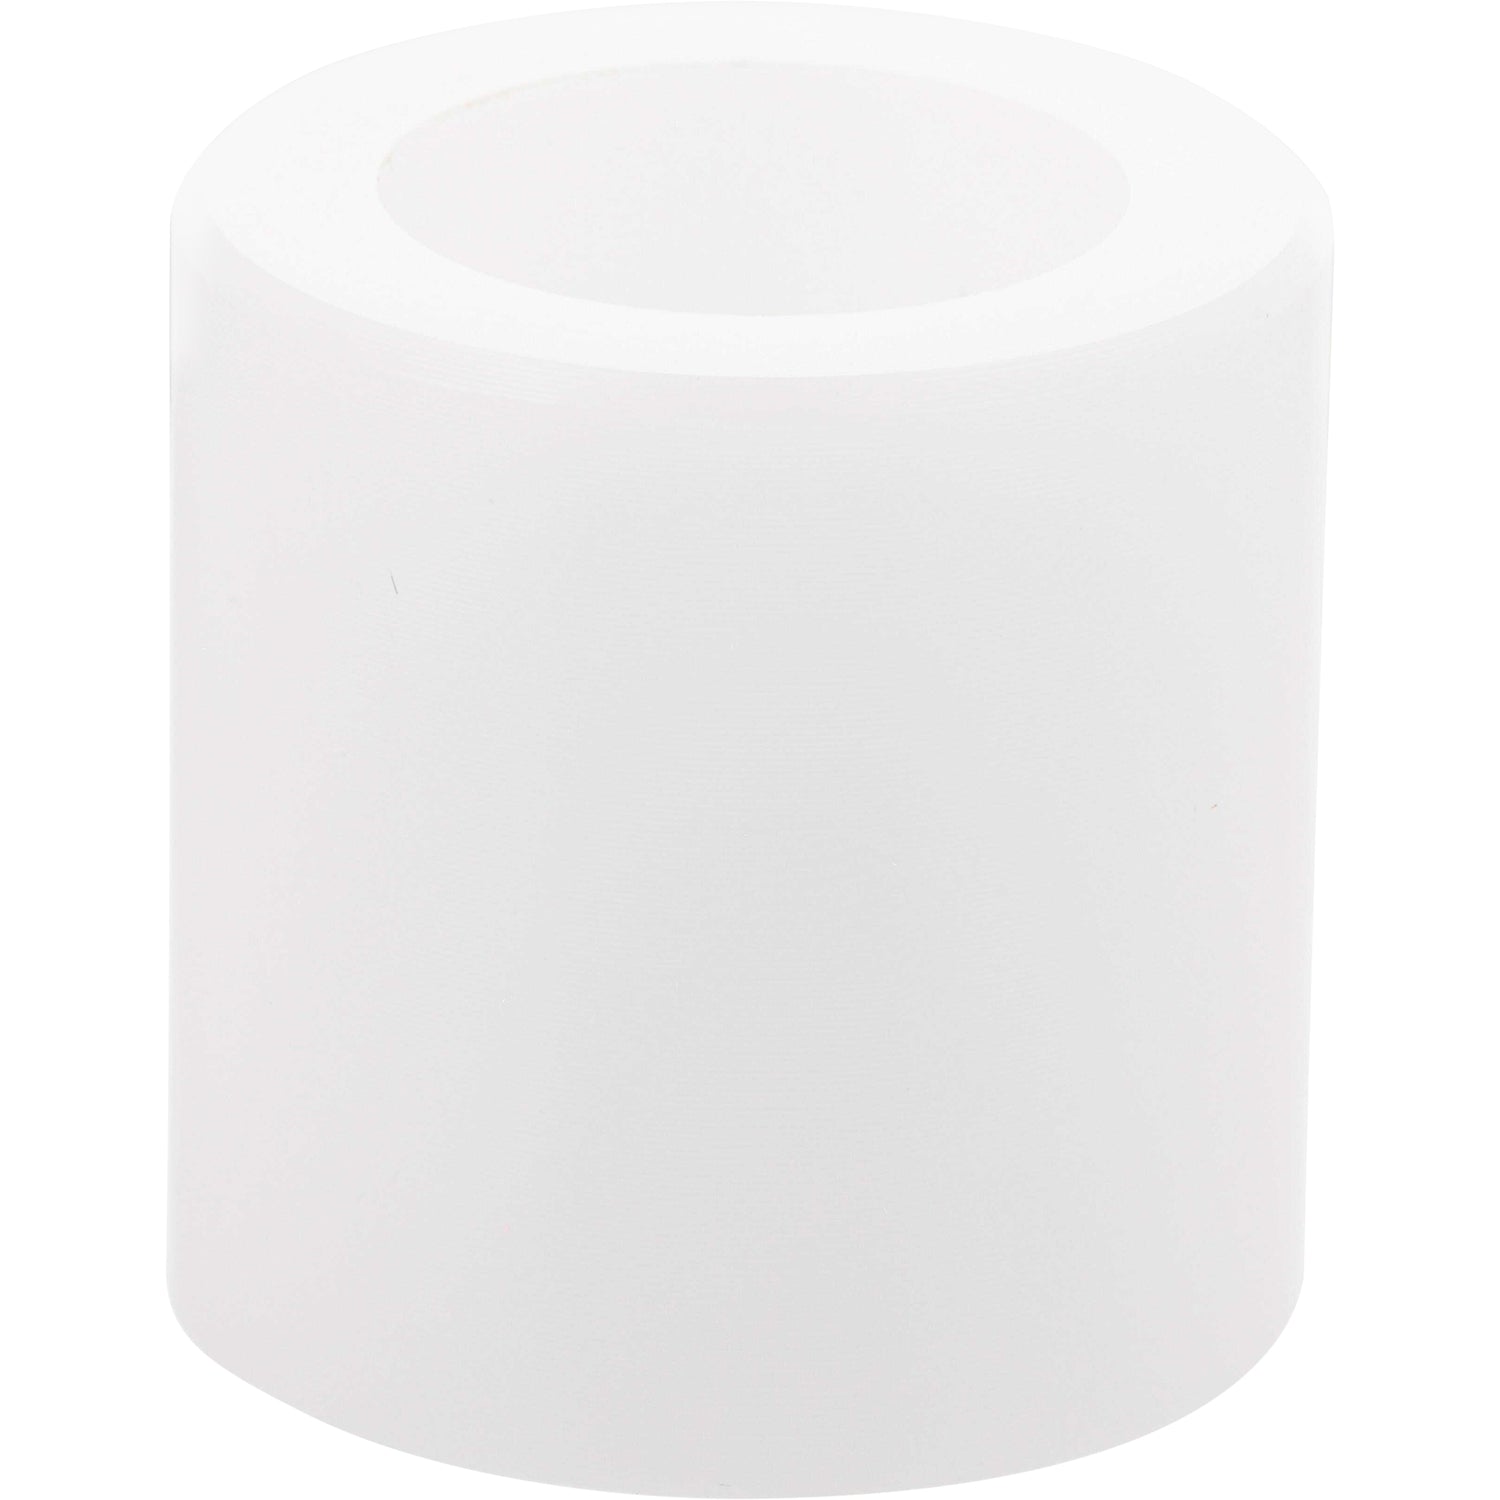 Cylindrical white plastic part with through hole on white background.